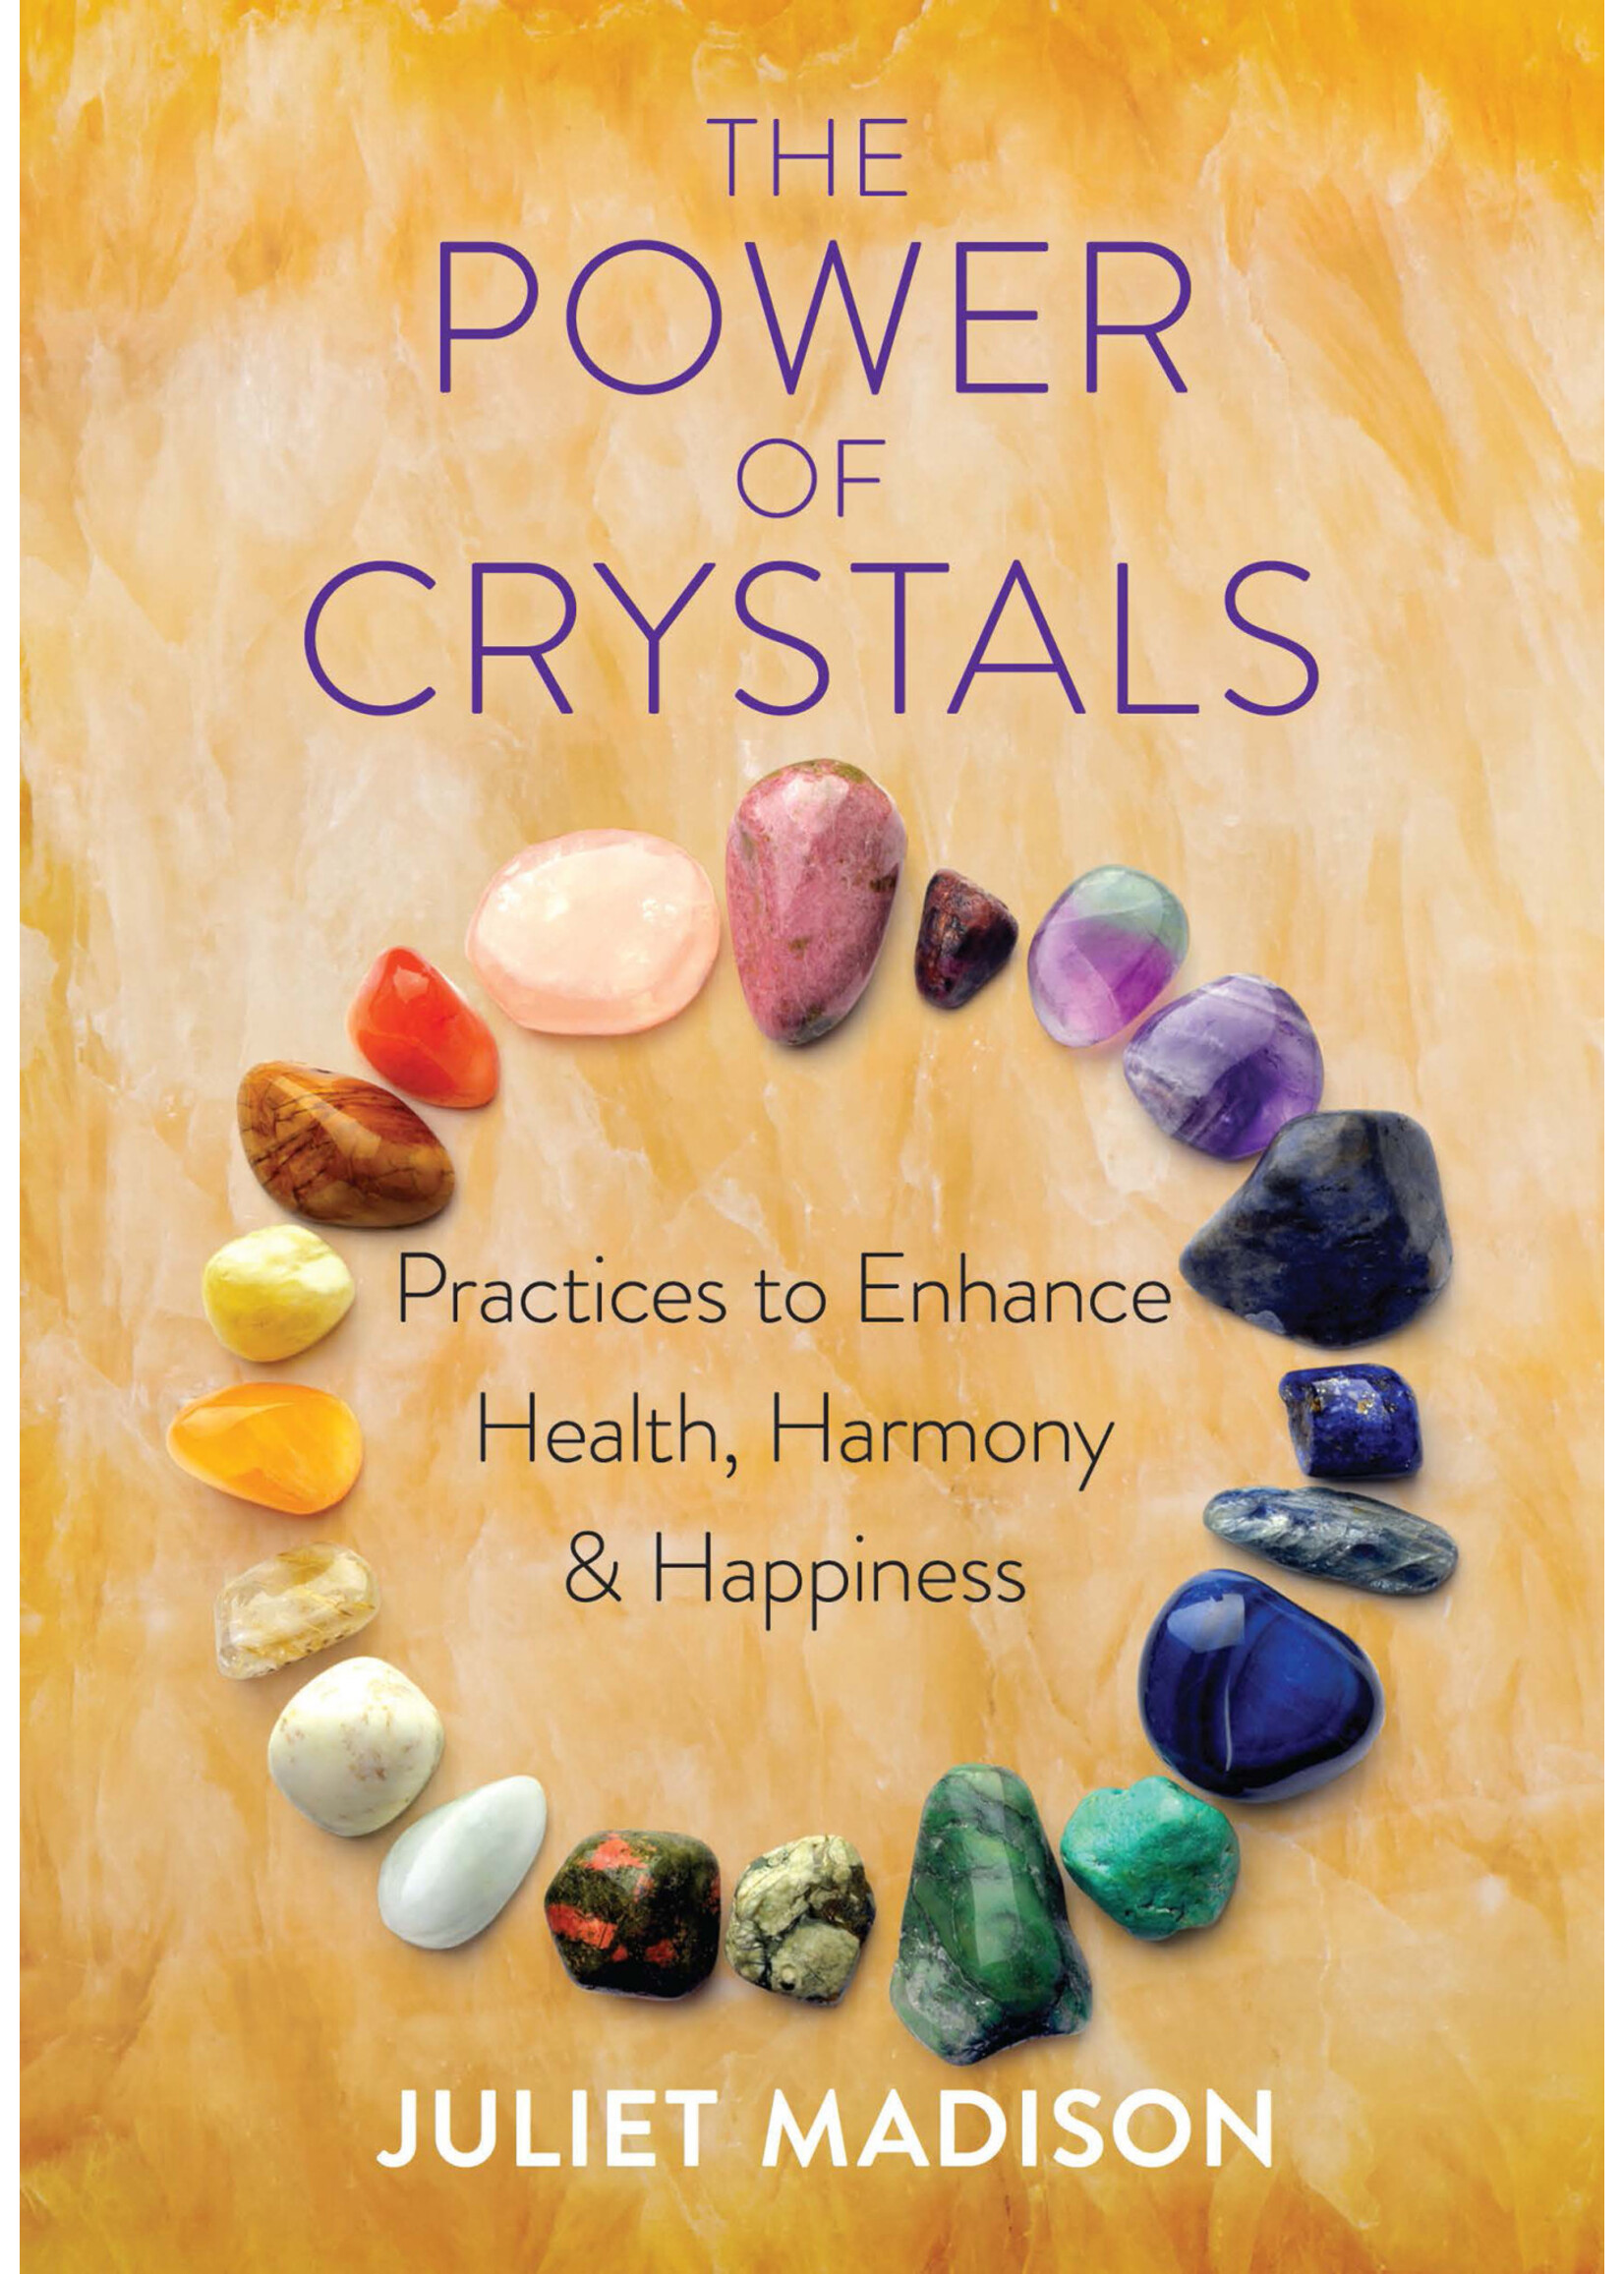 The Power of Crystals: Enhance Your Mind, Body, Spirit Connection by Juliet Madison